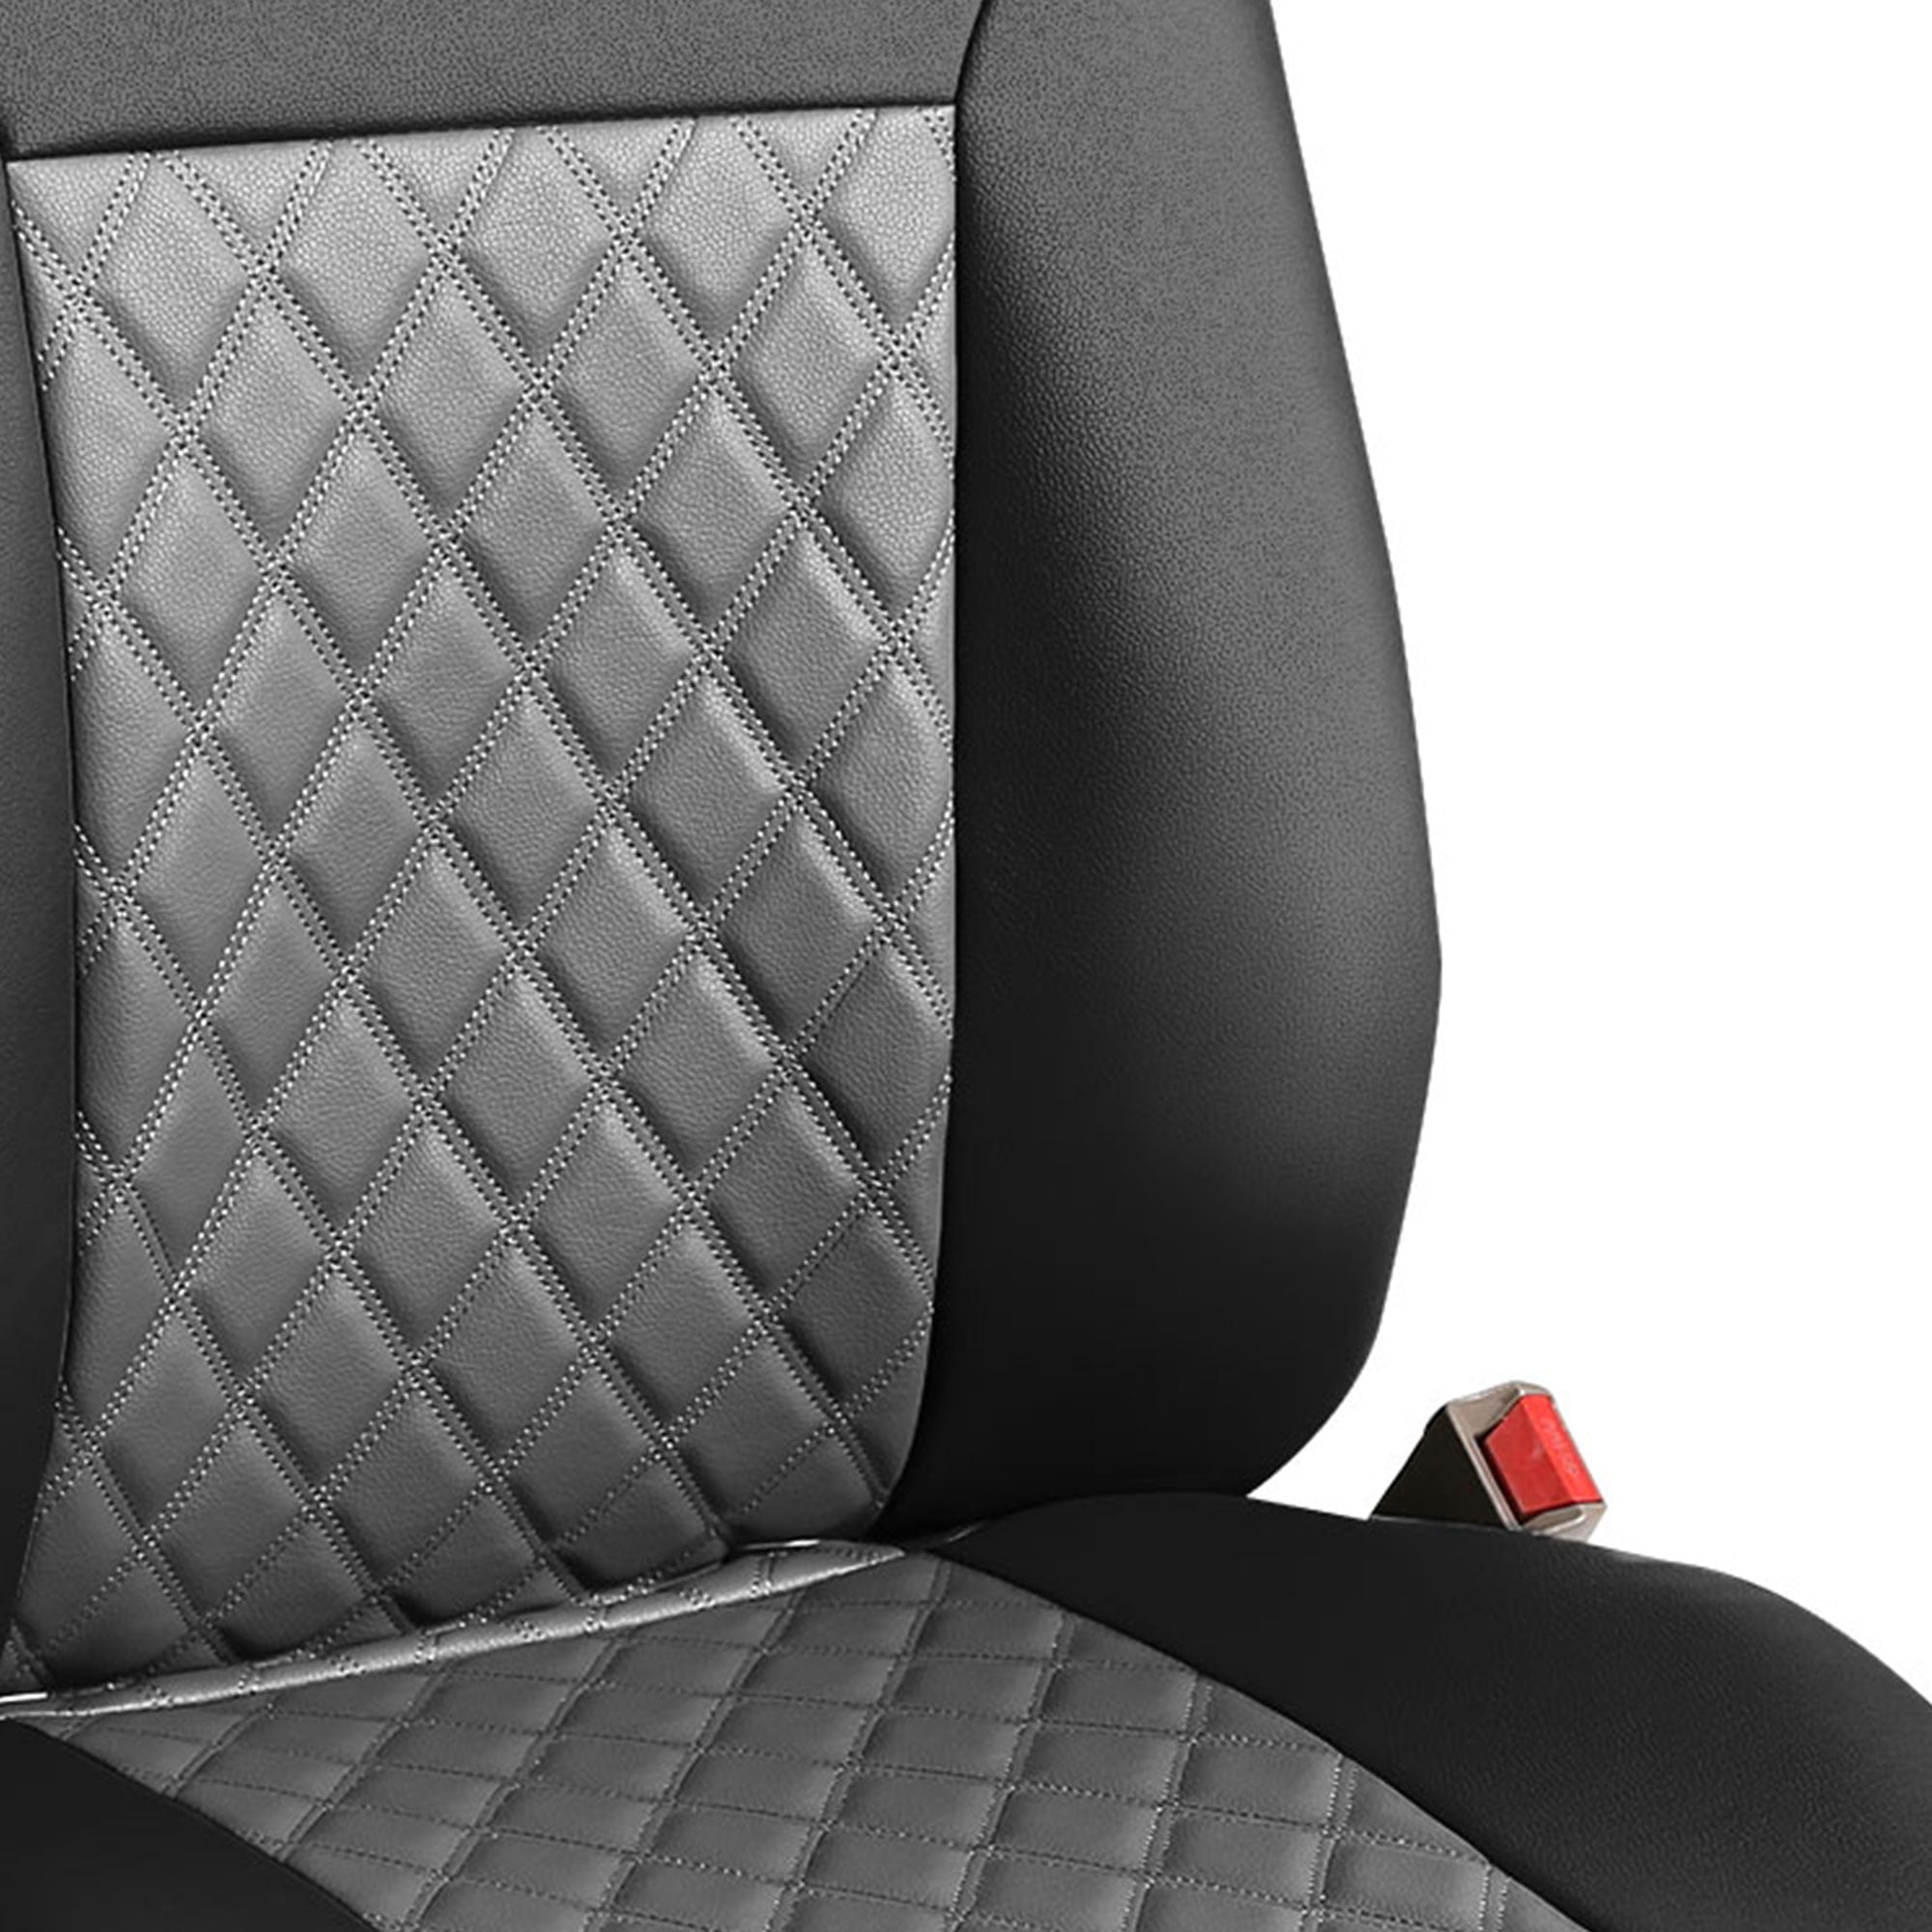 FH Group Deluxe Faux Leather 47 in. x 23 in. x 1 in. Diamond Pattern Car Seat  Cushions DMPU089BLACK102 - The Home Depot